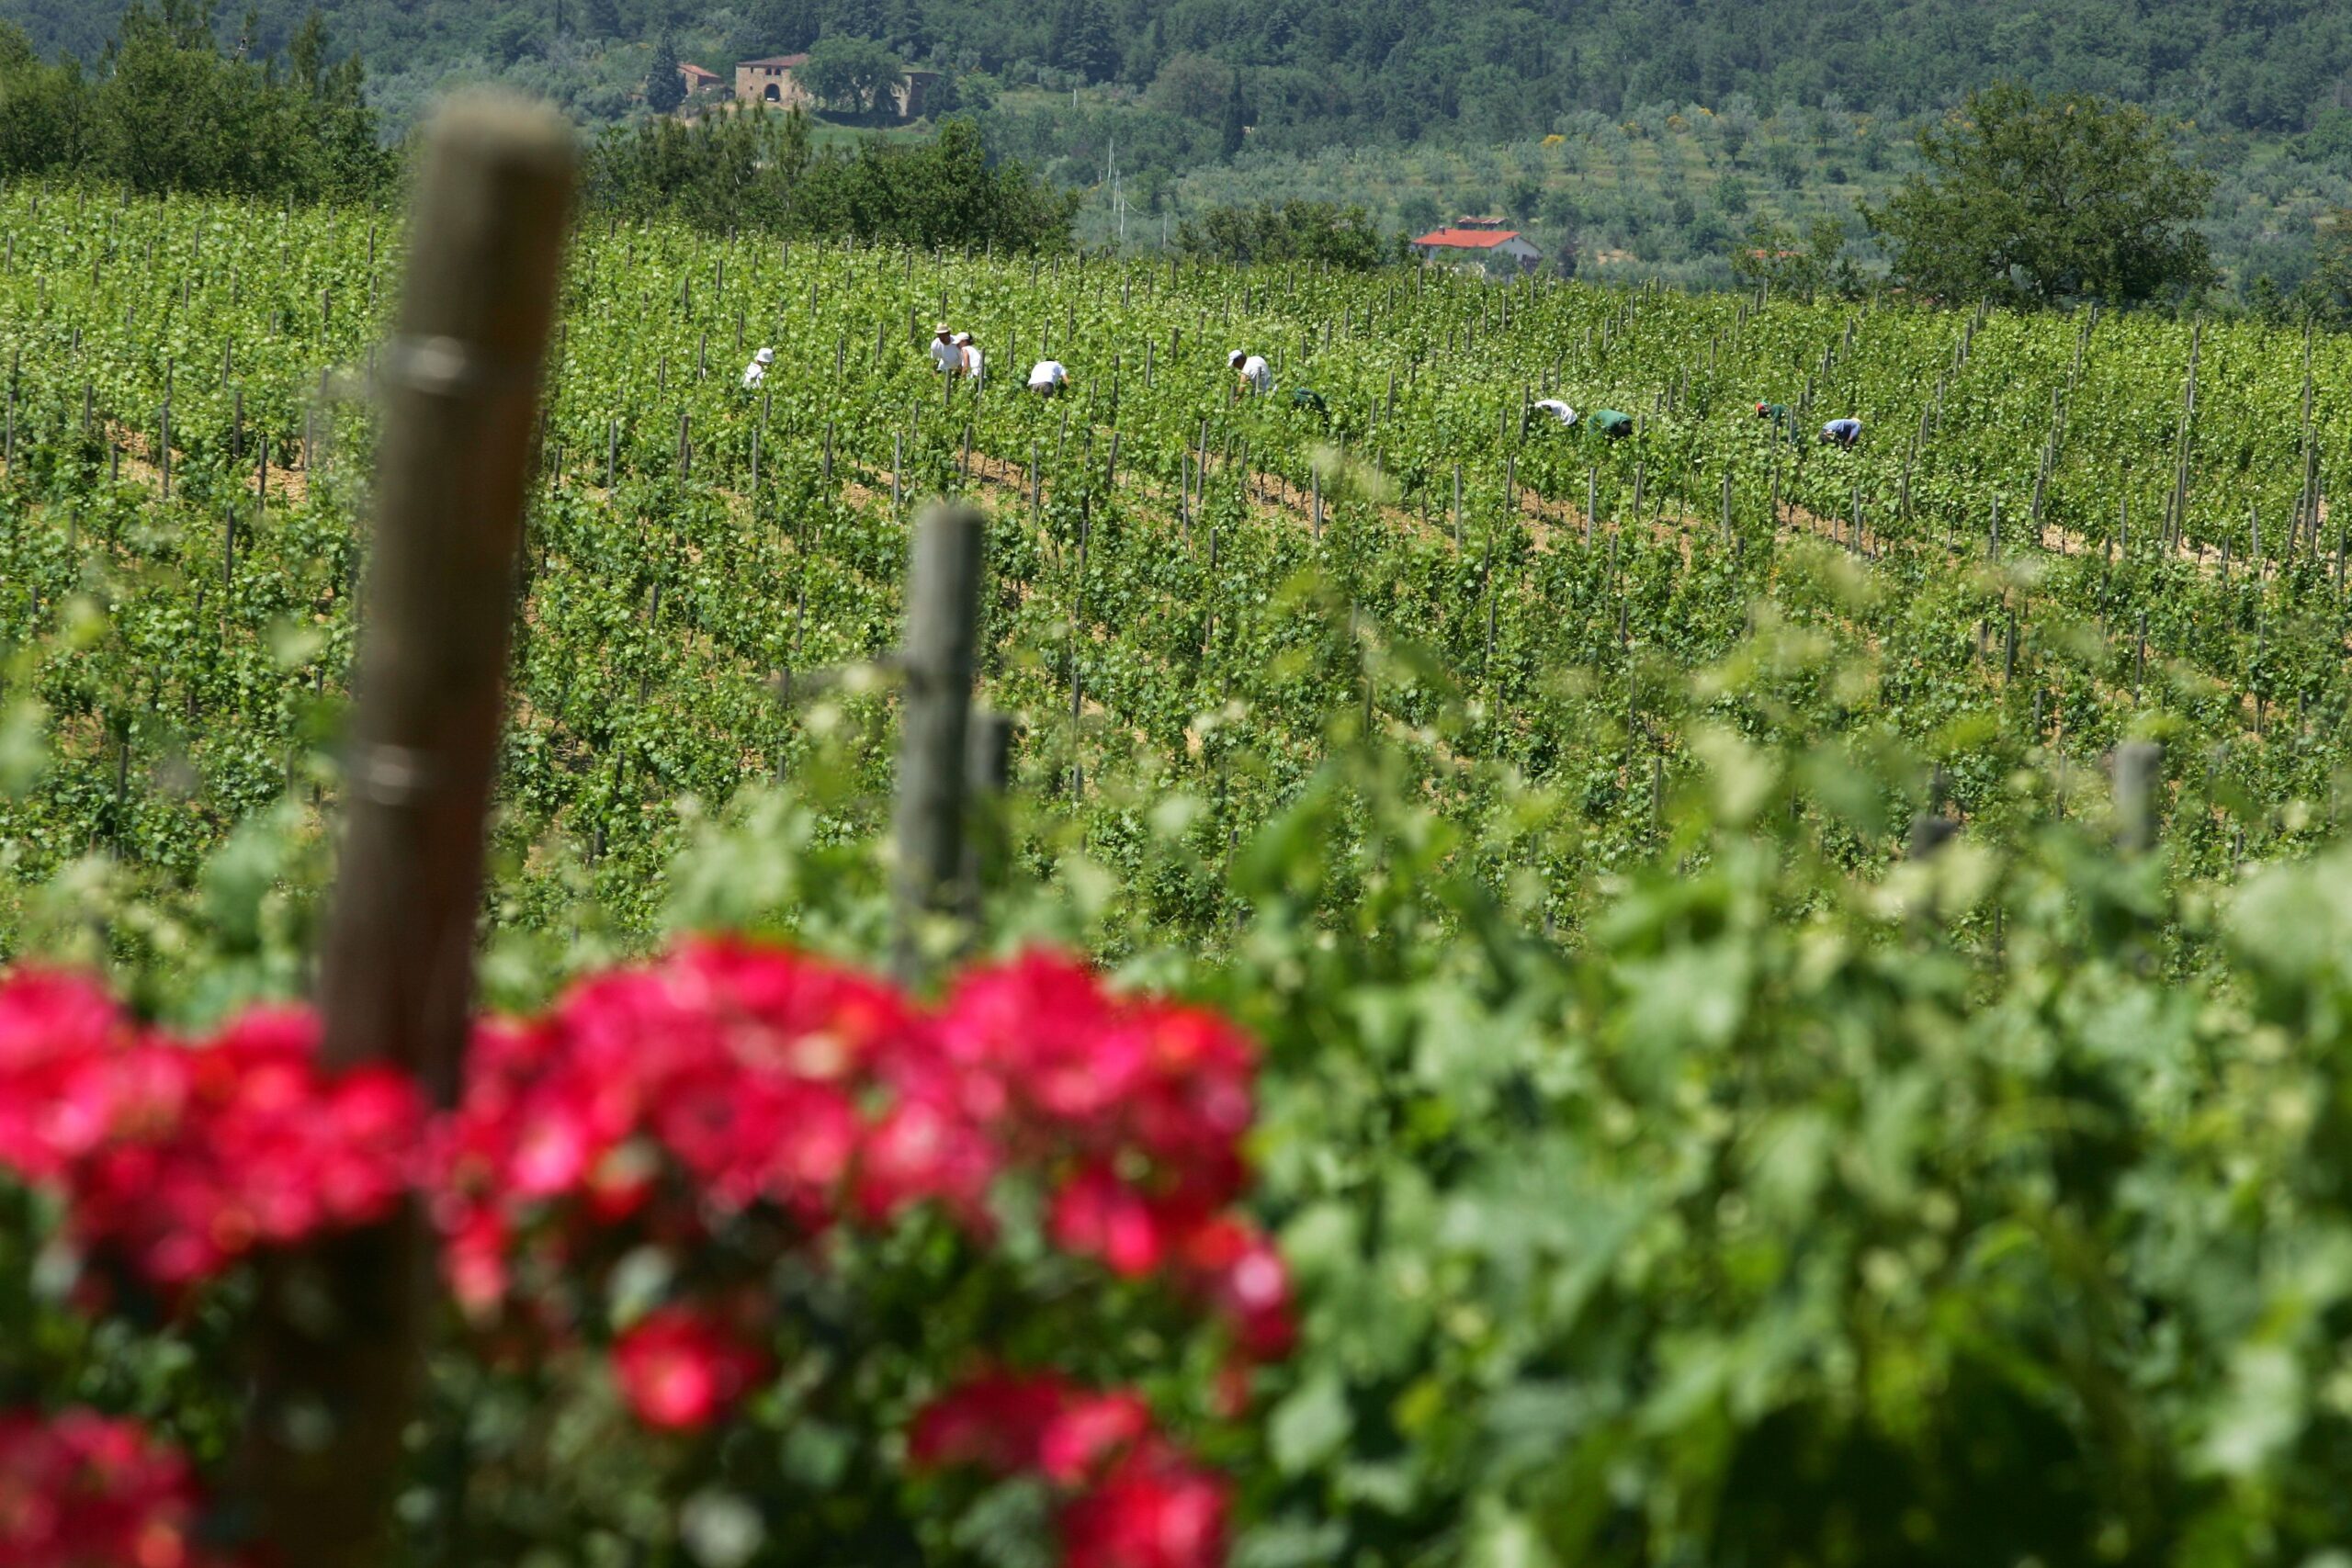 Tuscany is on the ball when it comes to Wine & Tourism! Read Why